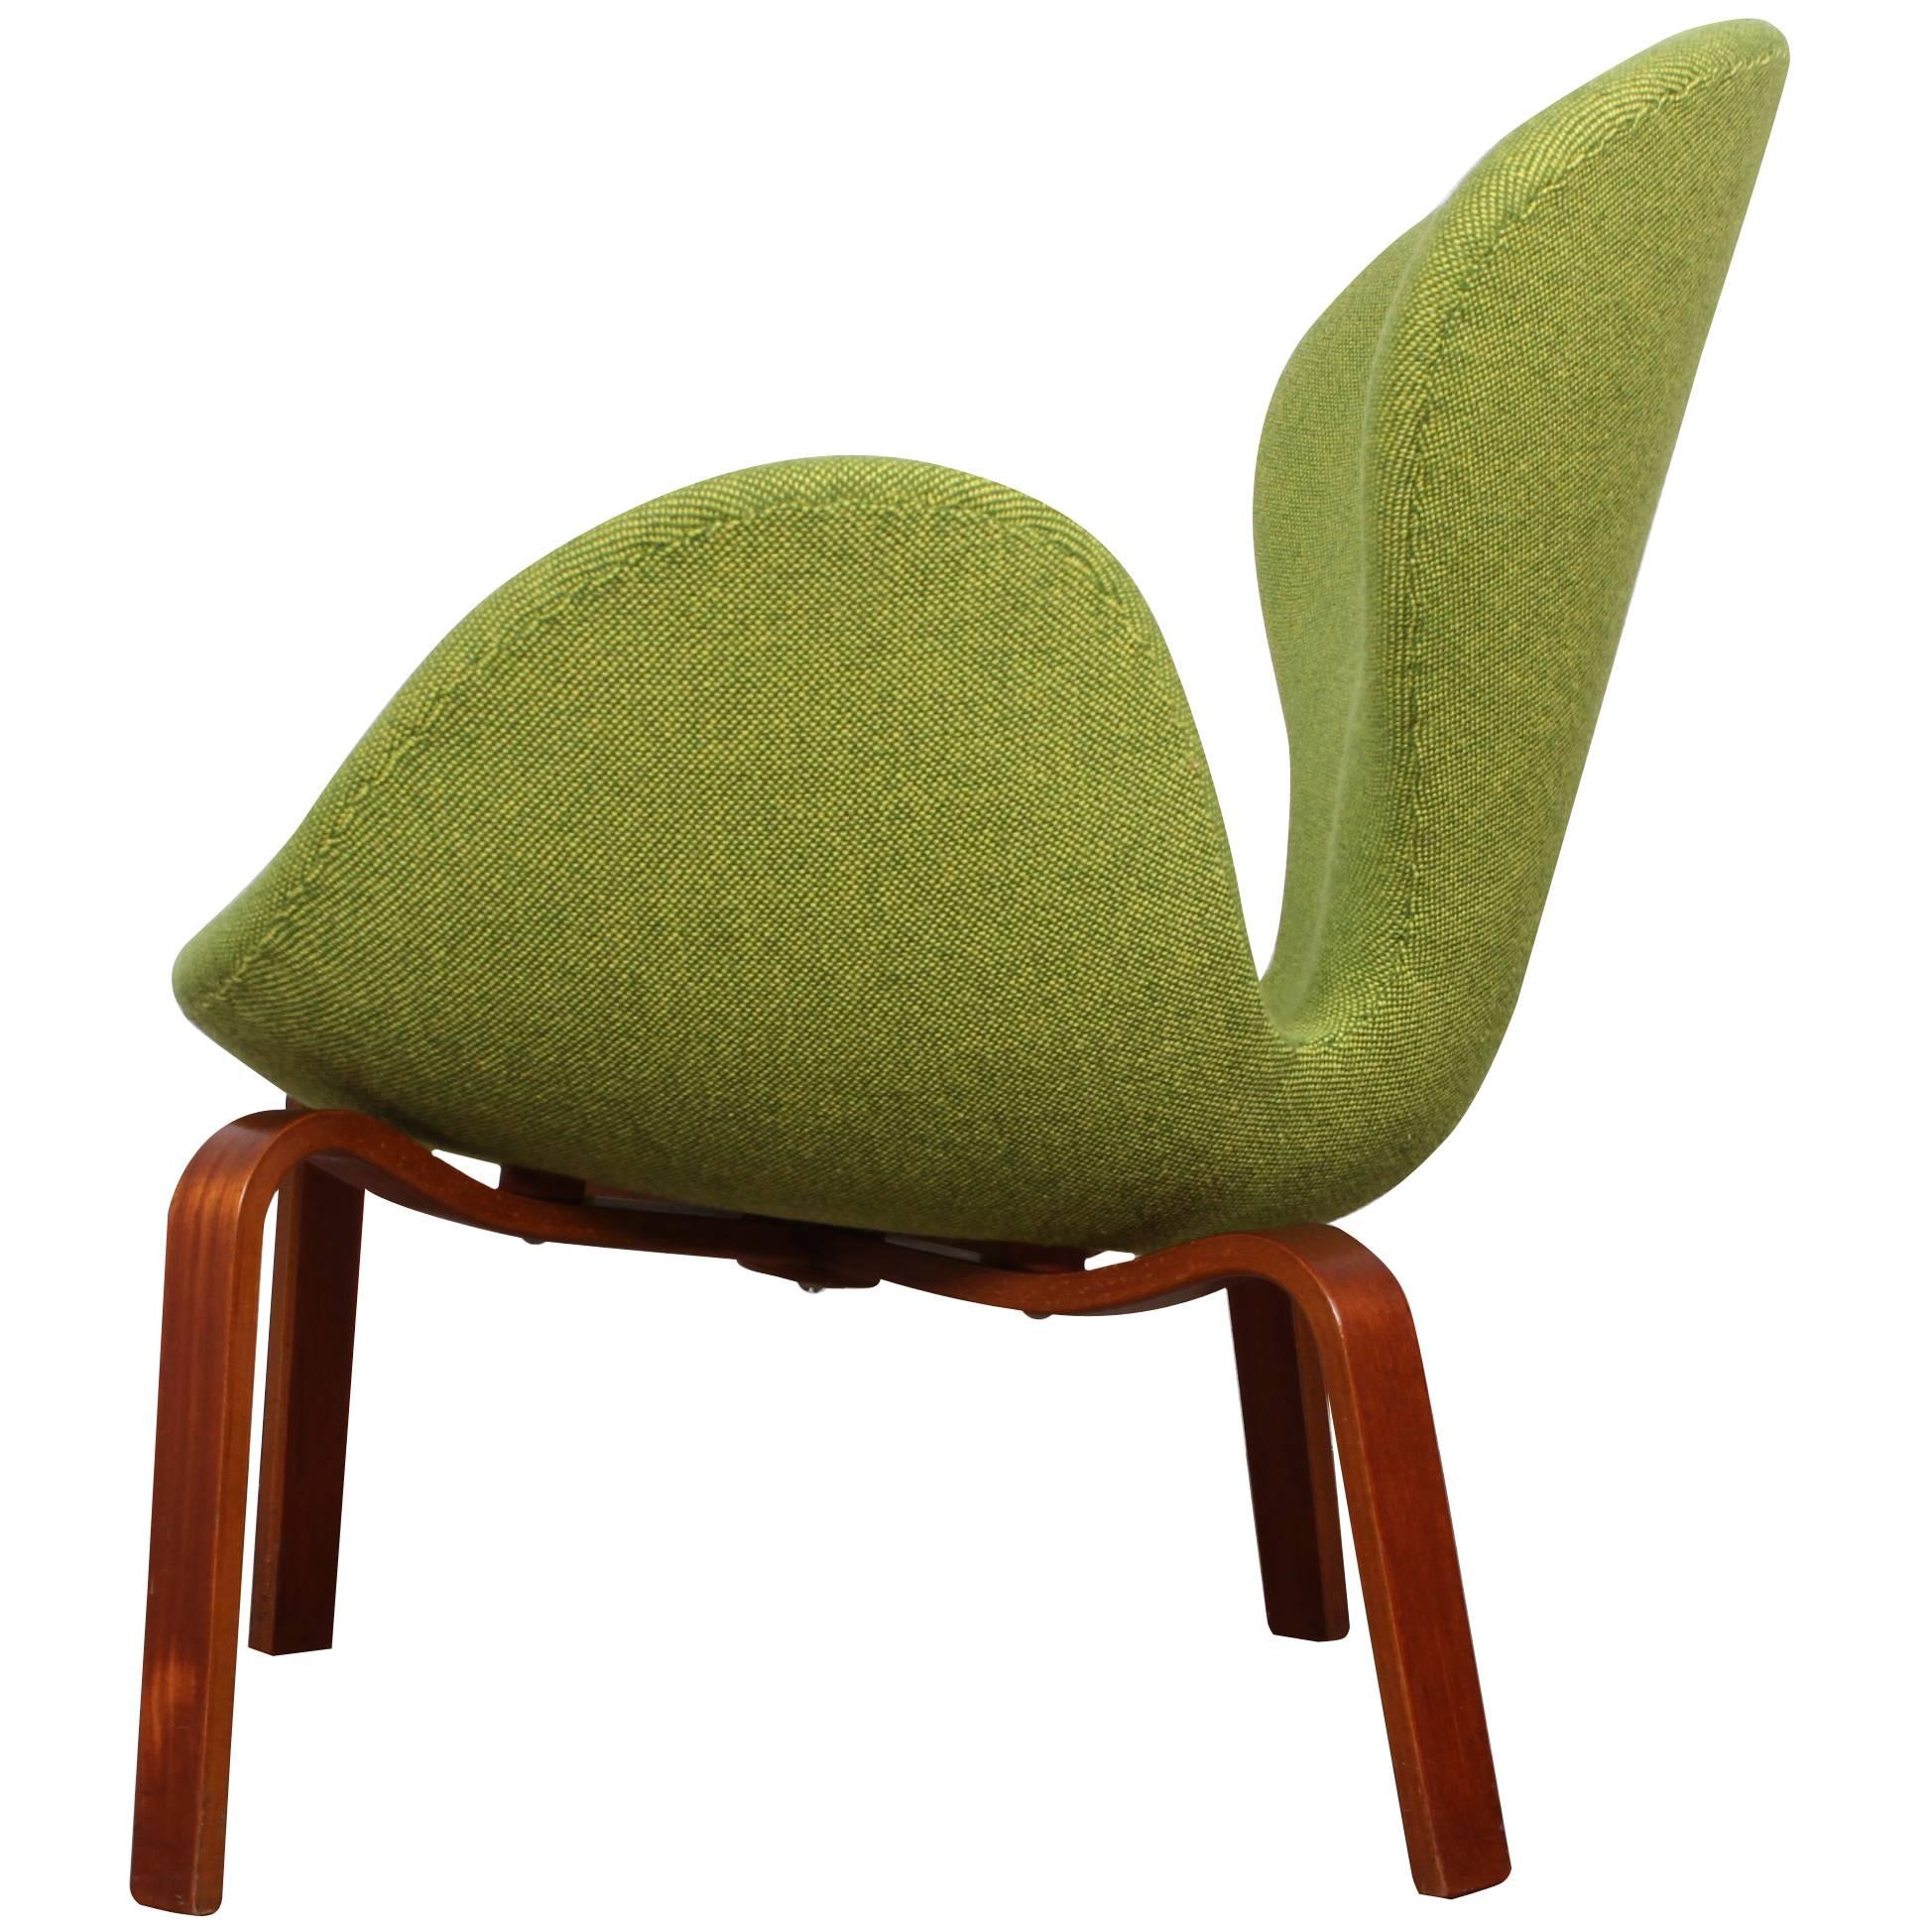 Early Swan Chair by Arne Jacobsen